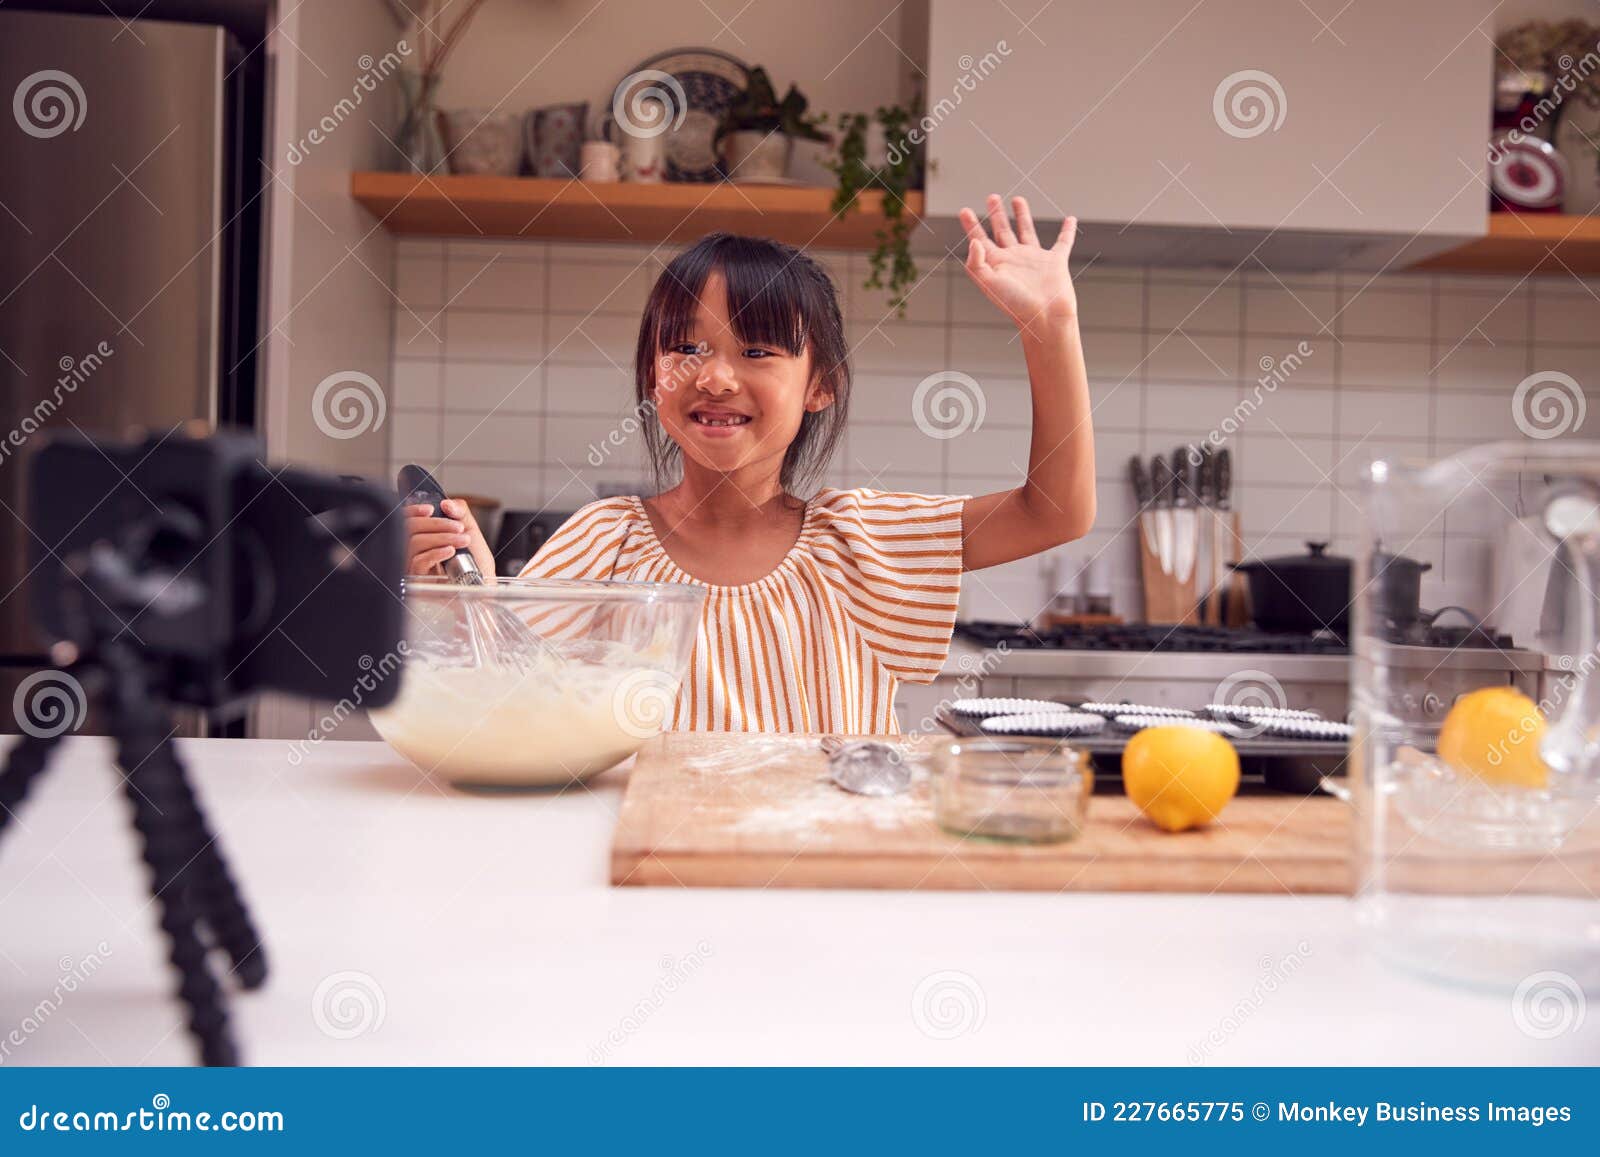 asian girl baking cupcakes in kitchen at home whilst on vlogging on mobile phone